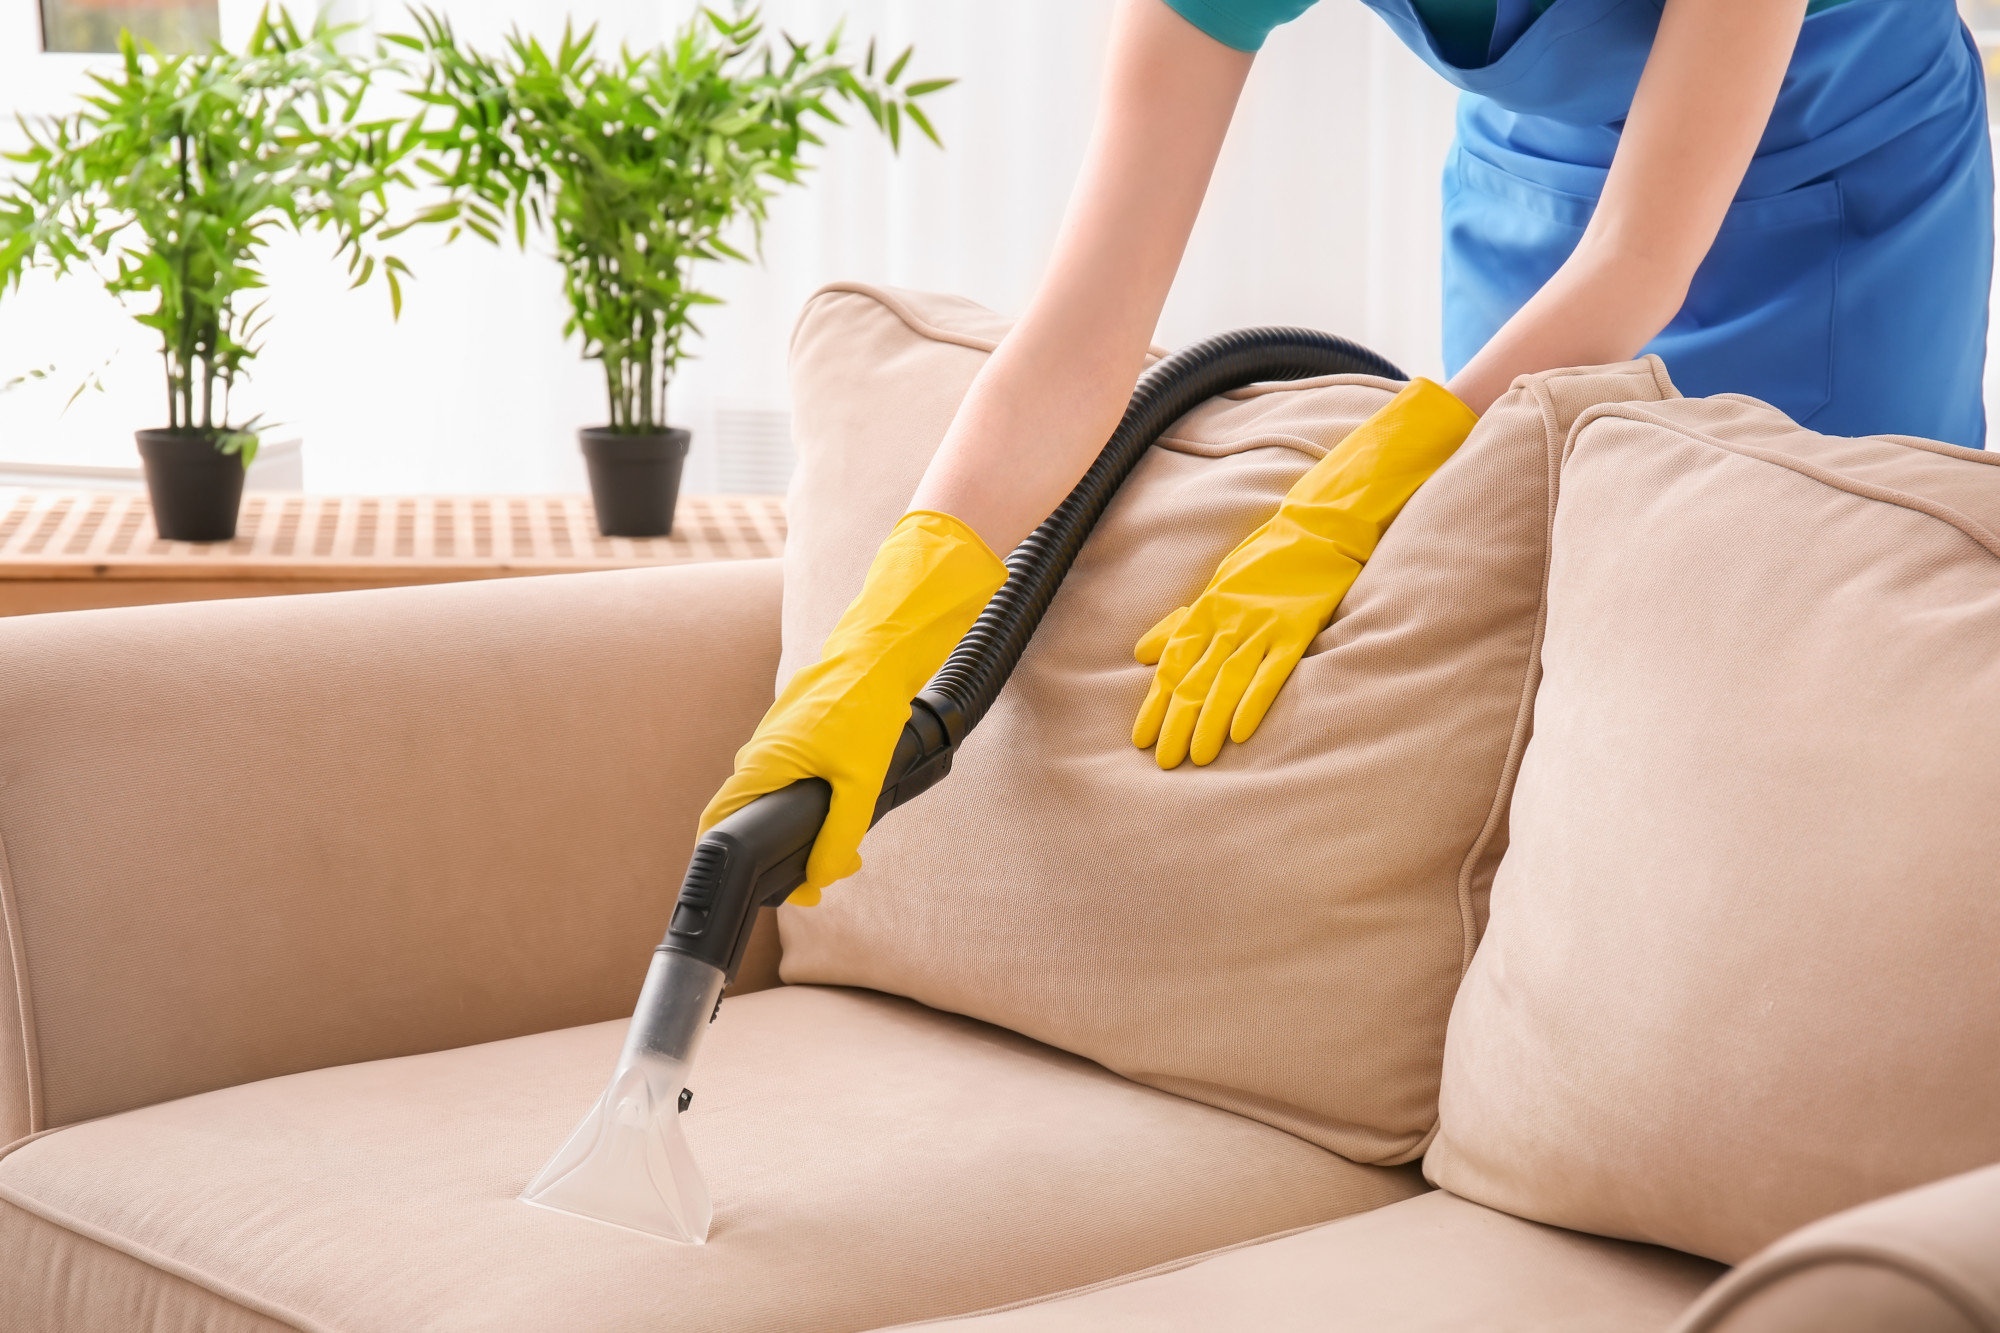 How To Clean A Smelly Couch, How To Deodorize Upholstered Furniture